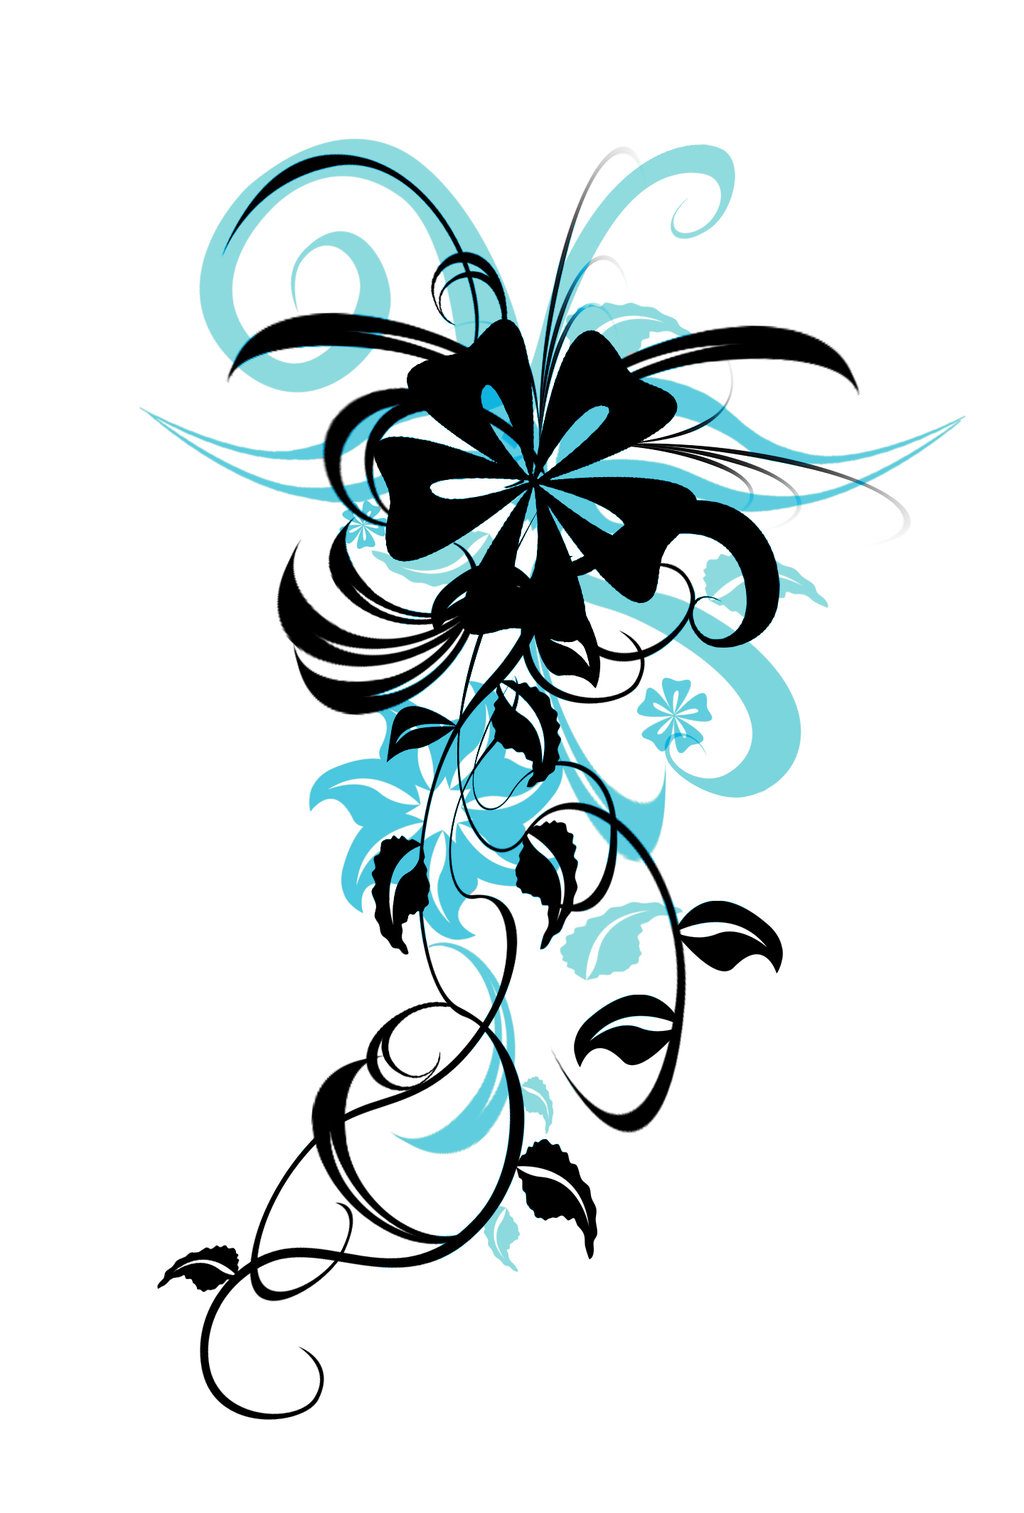 Free Flower Tattoo Images, Download Free Flower Tattoo Images png